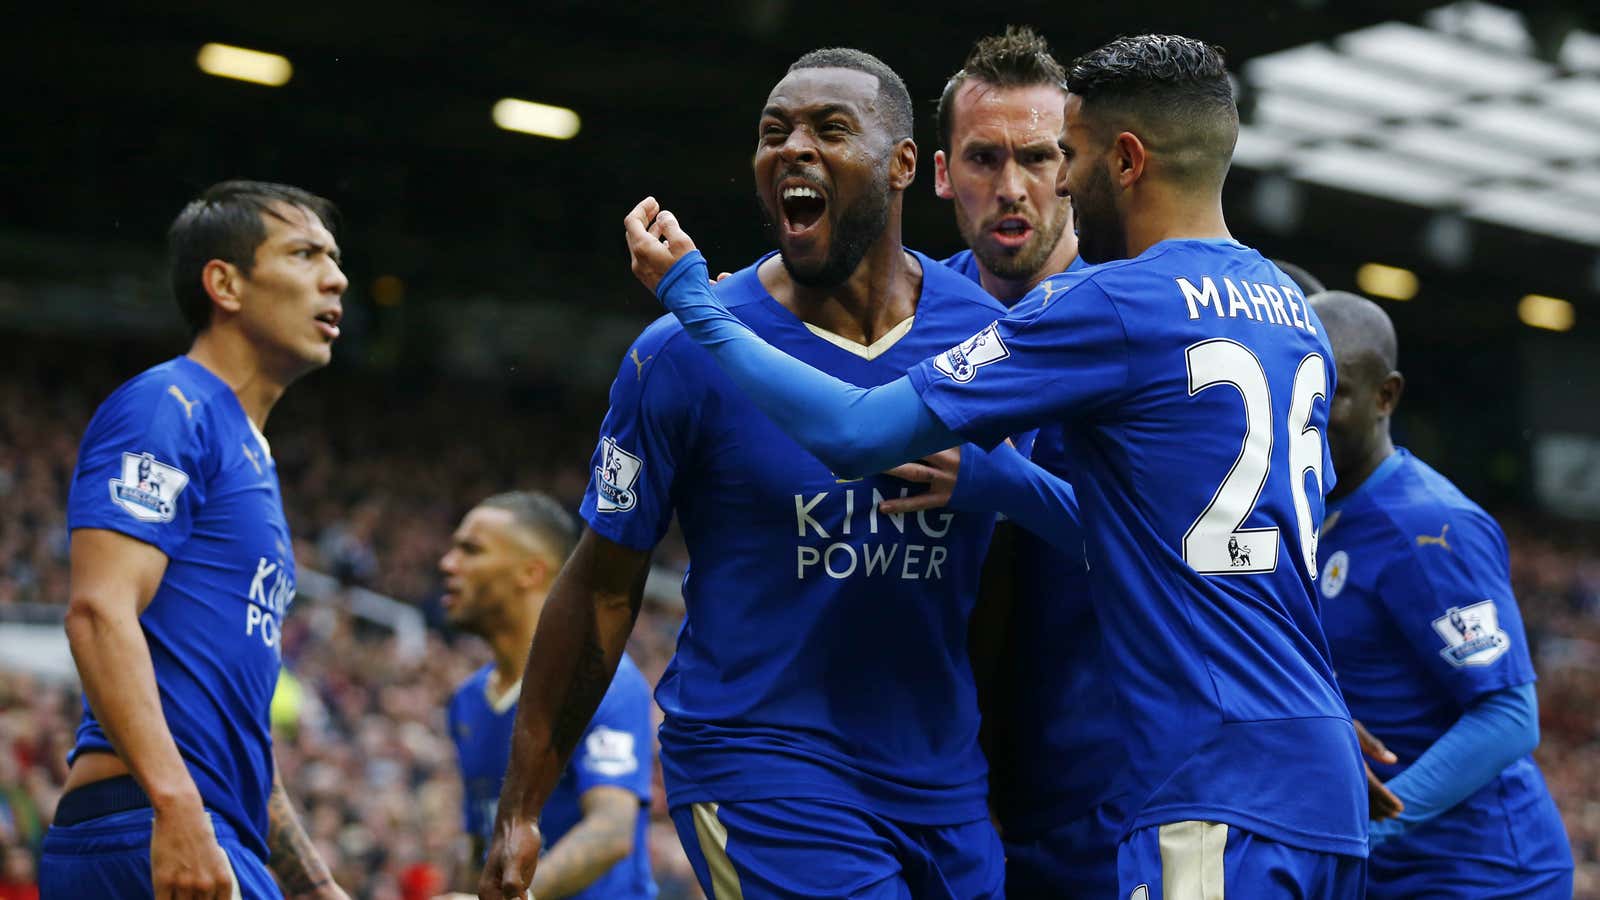 The remarkable story of Leicester City’s win will be told. Over and over.